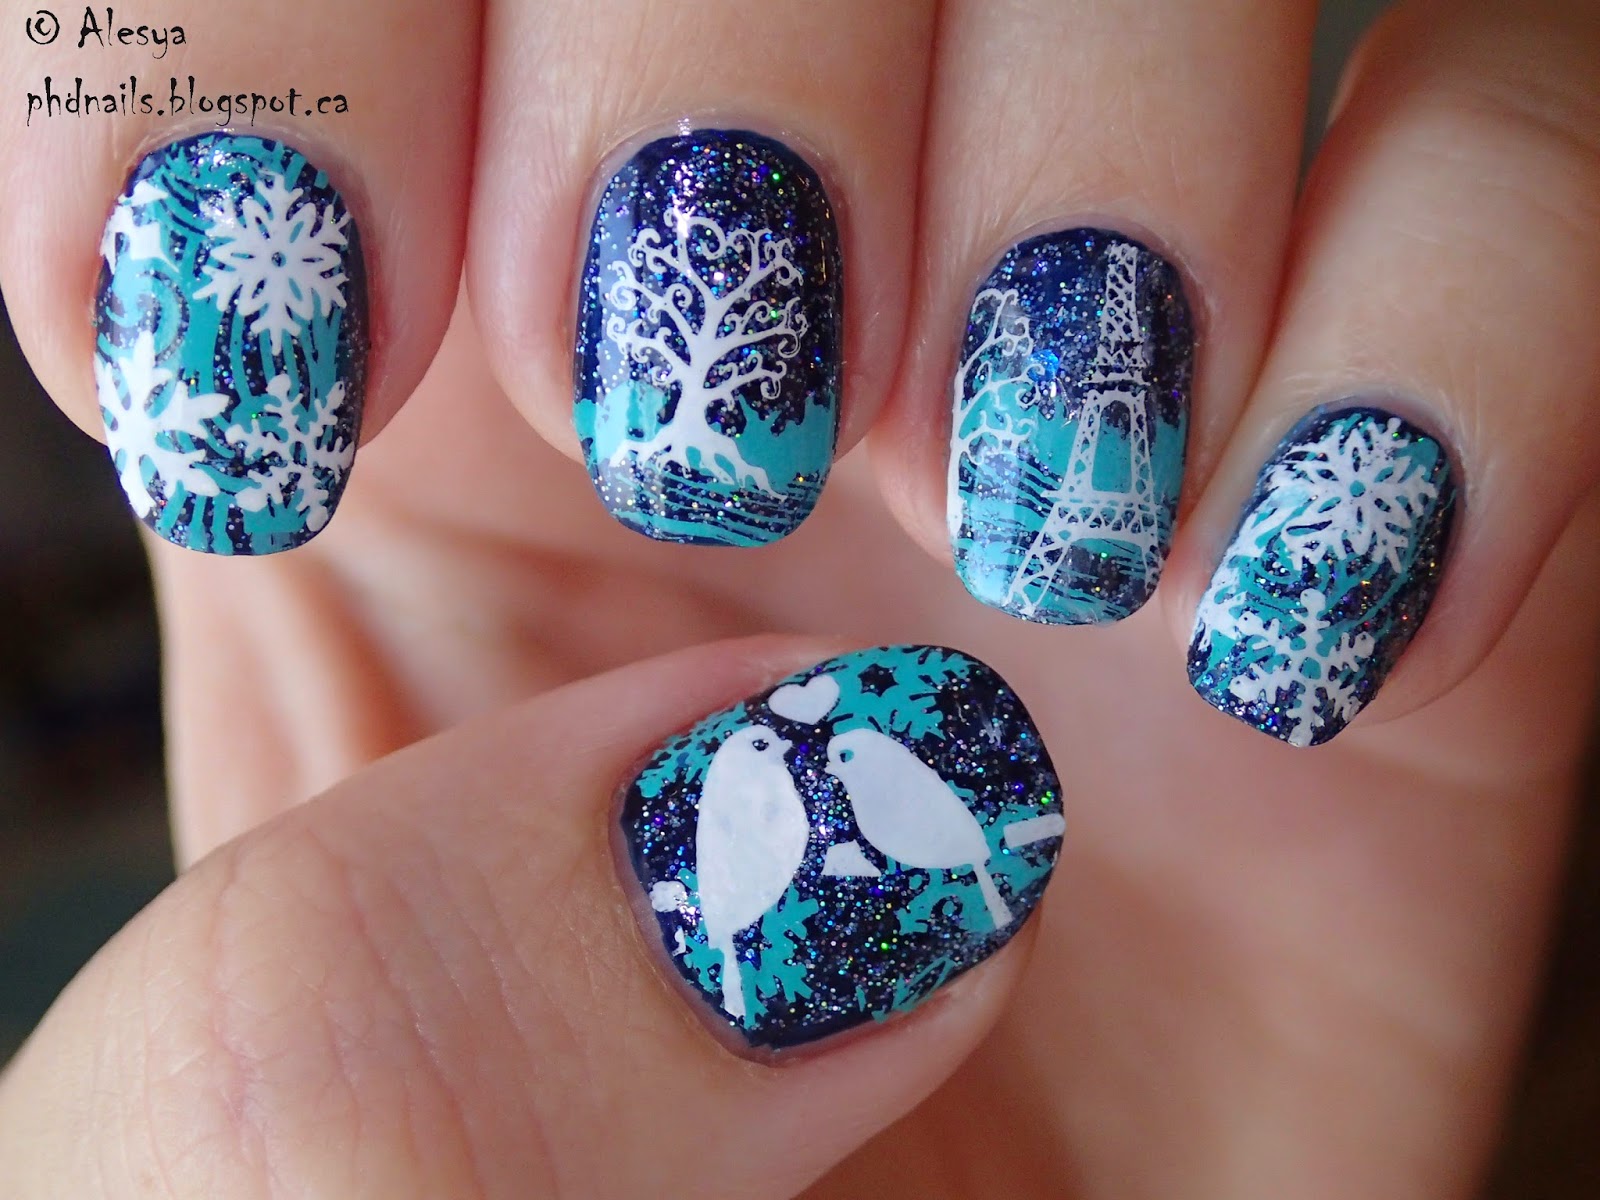 Winter Nail Art with Snowflakes and Icicles - wide 8